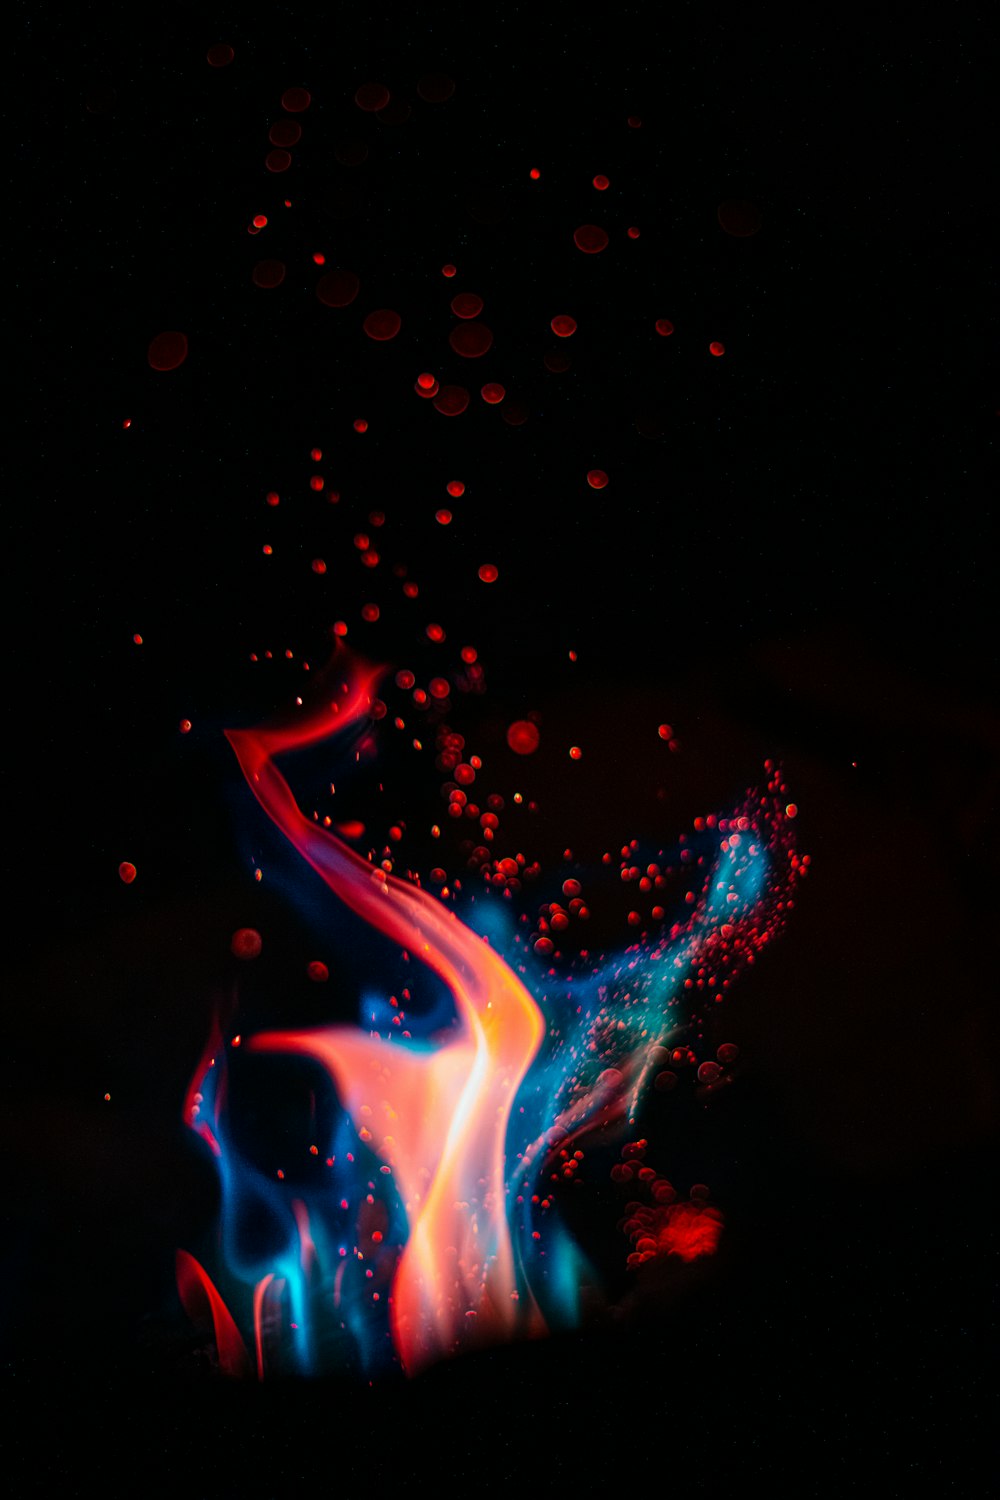 Red And Blue Fire Digital Wallpaper Photo Free Ornament Image On Images, Photos, Reviews